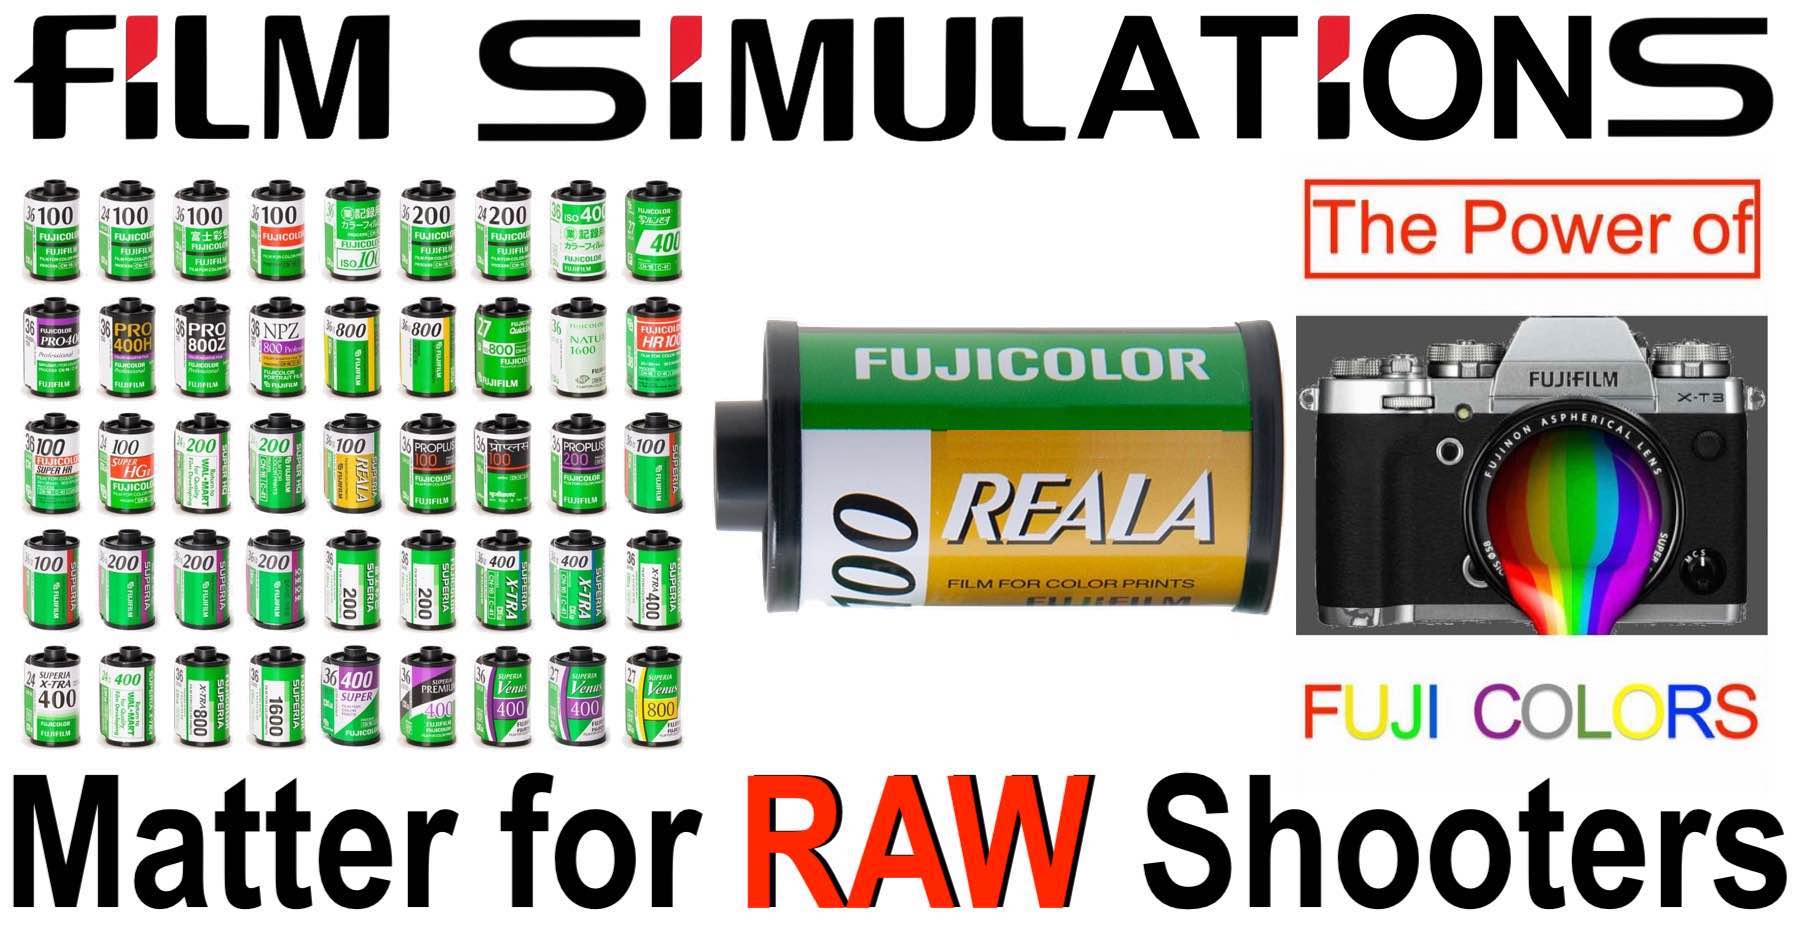 Why Fujifilm's Film Simulation Matter also for RAW Shooters